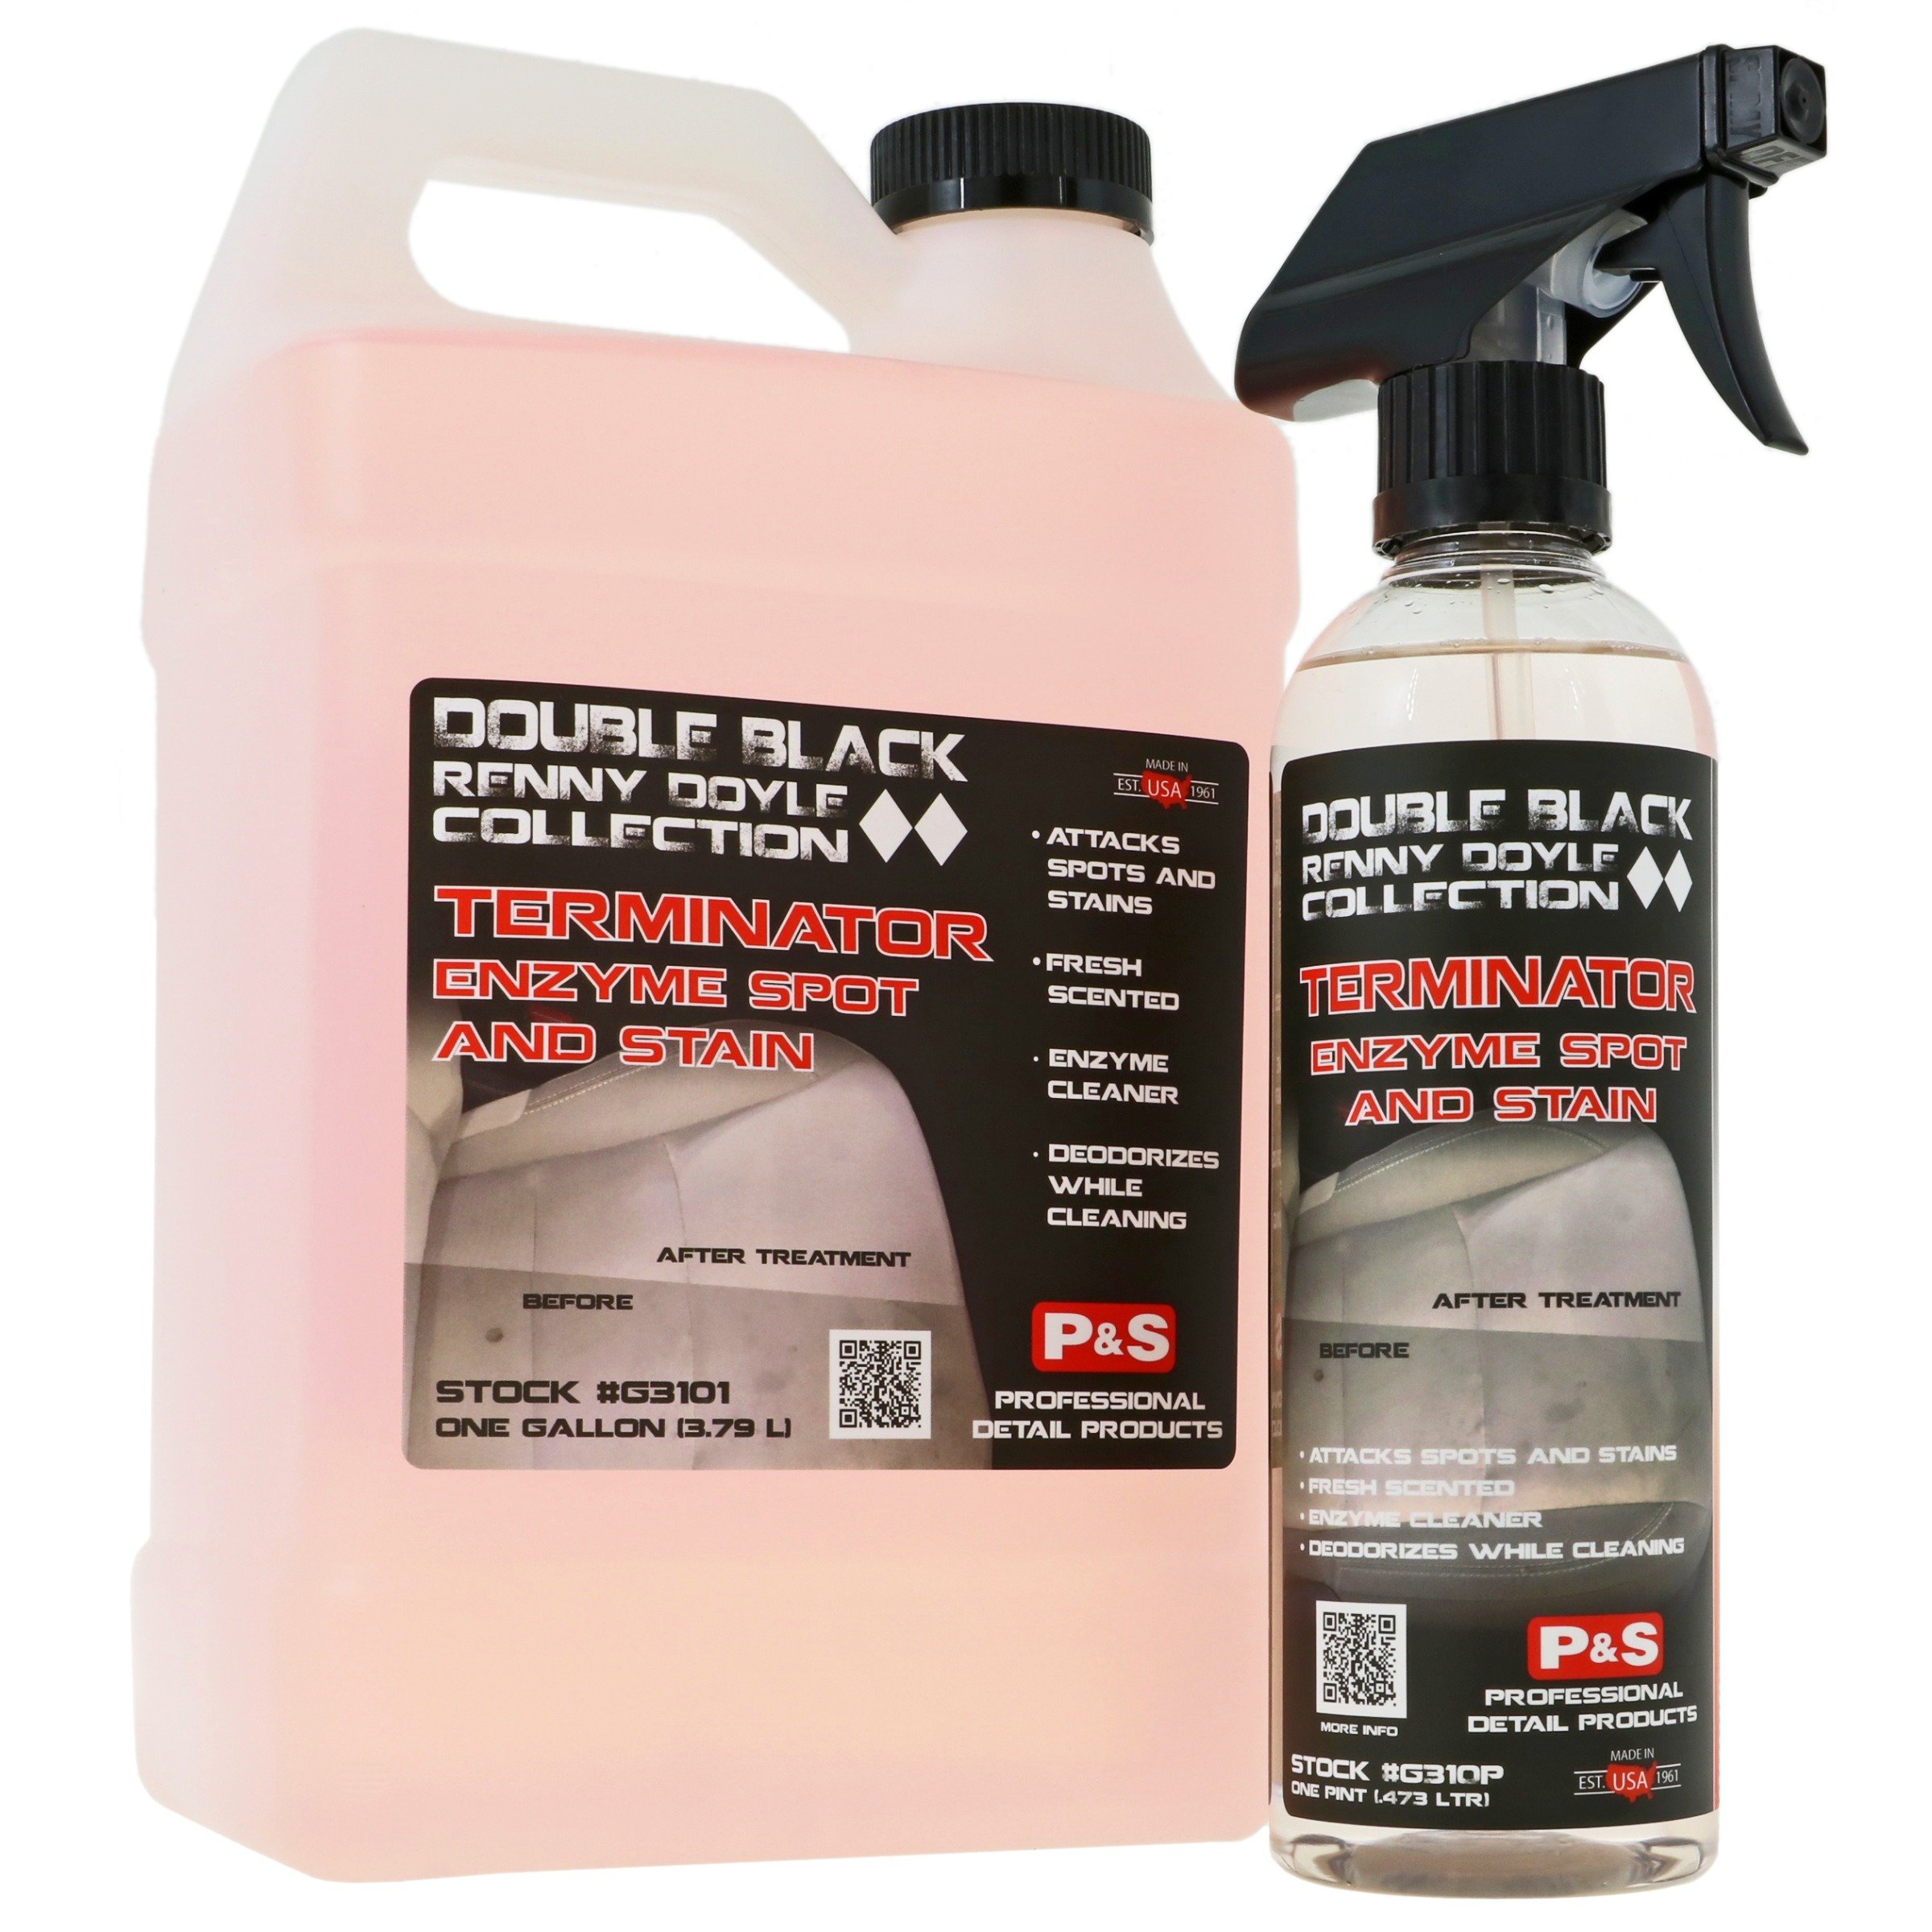 Terminator Enzyme Spot & Stain Remover